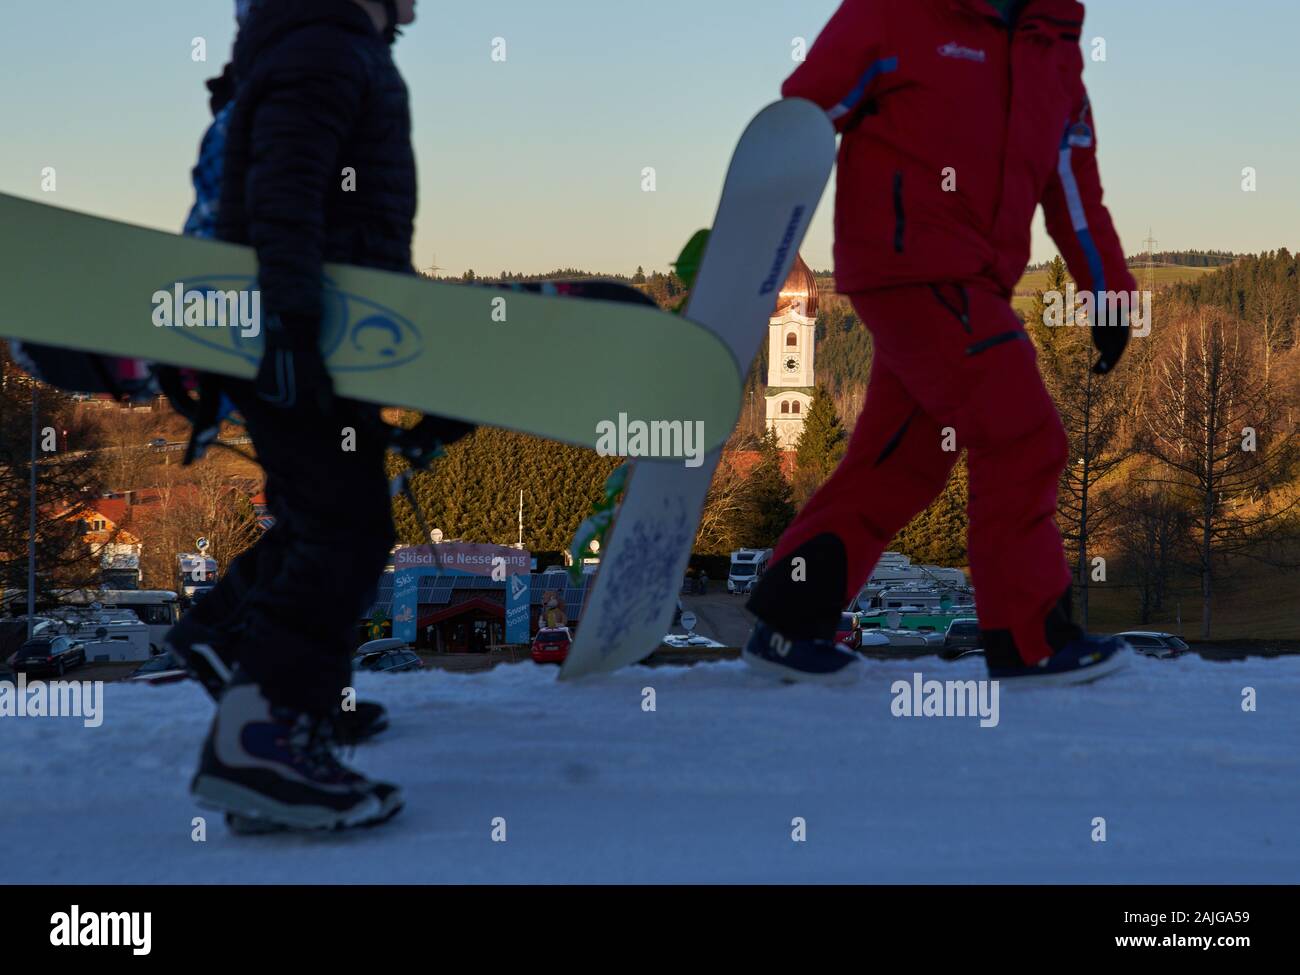 Ski arena Alpspitzbahn  January 02, 2020 in Nesselwang, Germany. Lack of snow due to warm weather and skiing on wintersport artificial snow at Ski arena Alpspitzbahn  January 02, 2020  in Nesselwang, Bavaria, Germany. © Peter Schatz / Alamy Live News Stock Photo